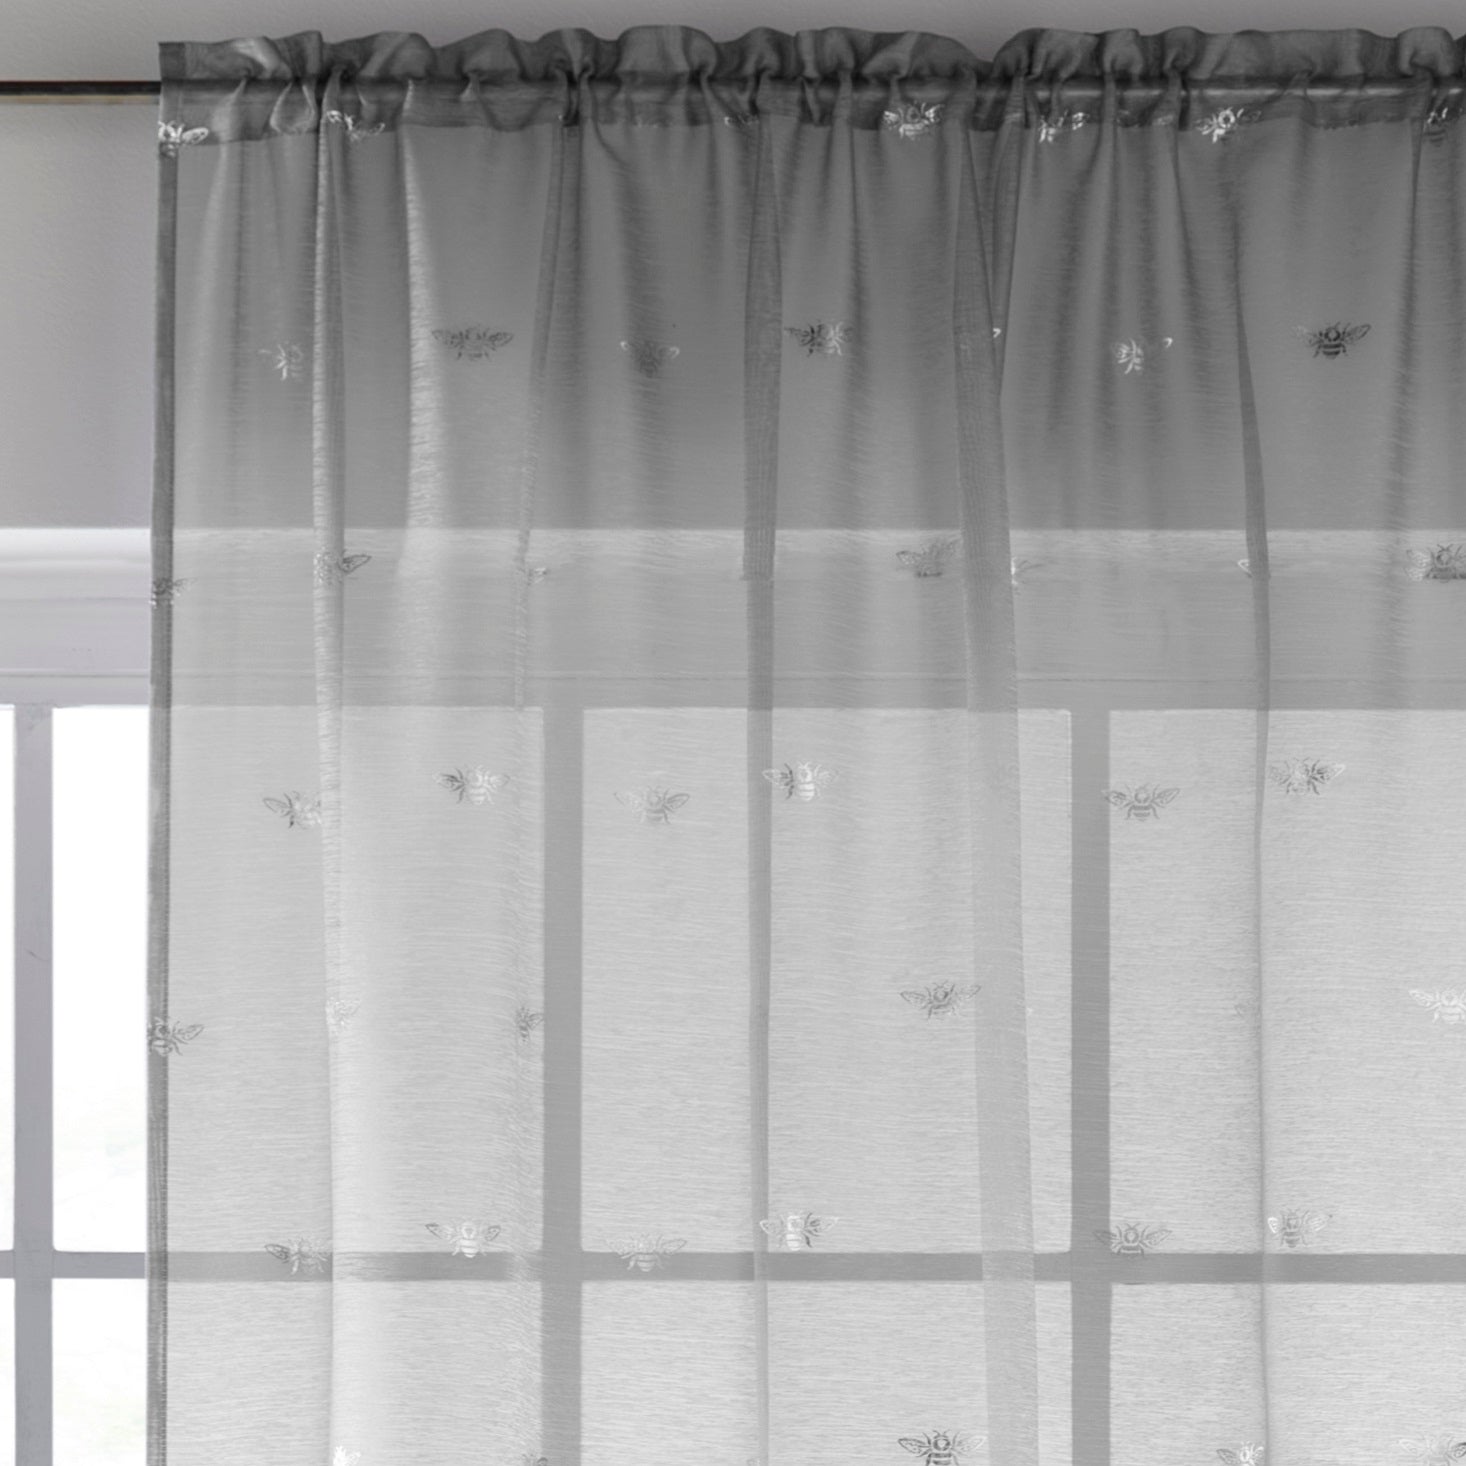 55x48" Sparkle Bees Voile Net Curtains Panel - Silver Grey